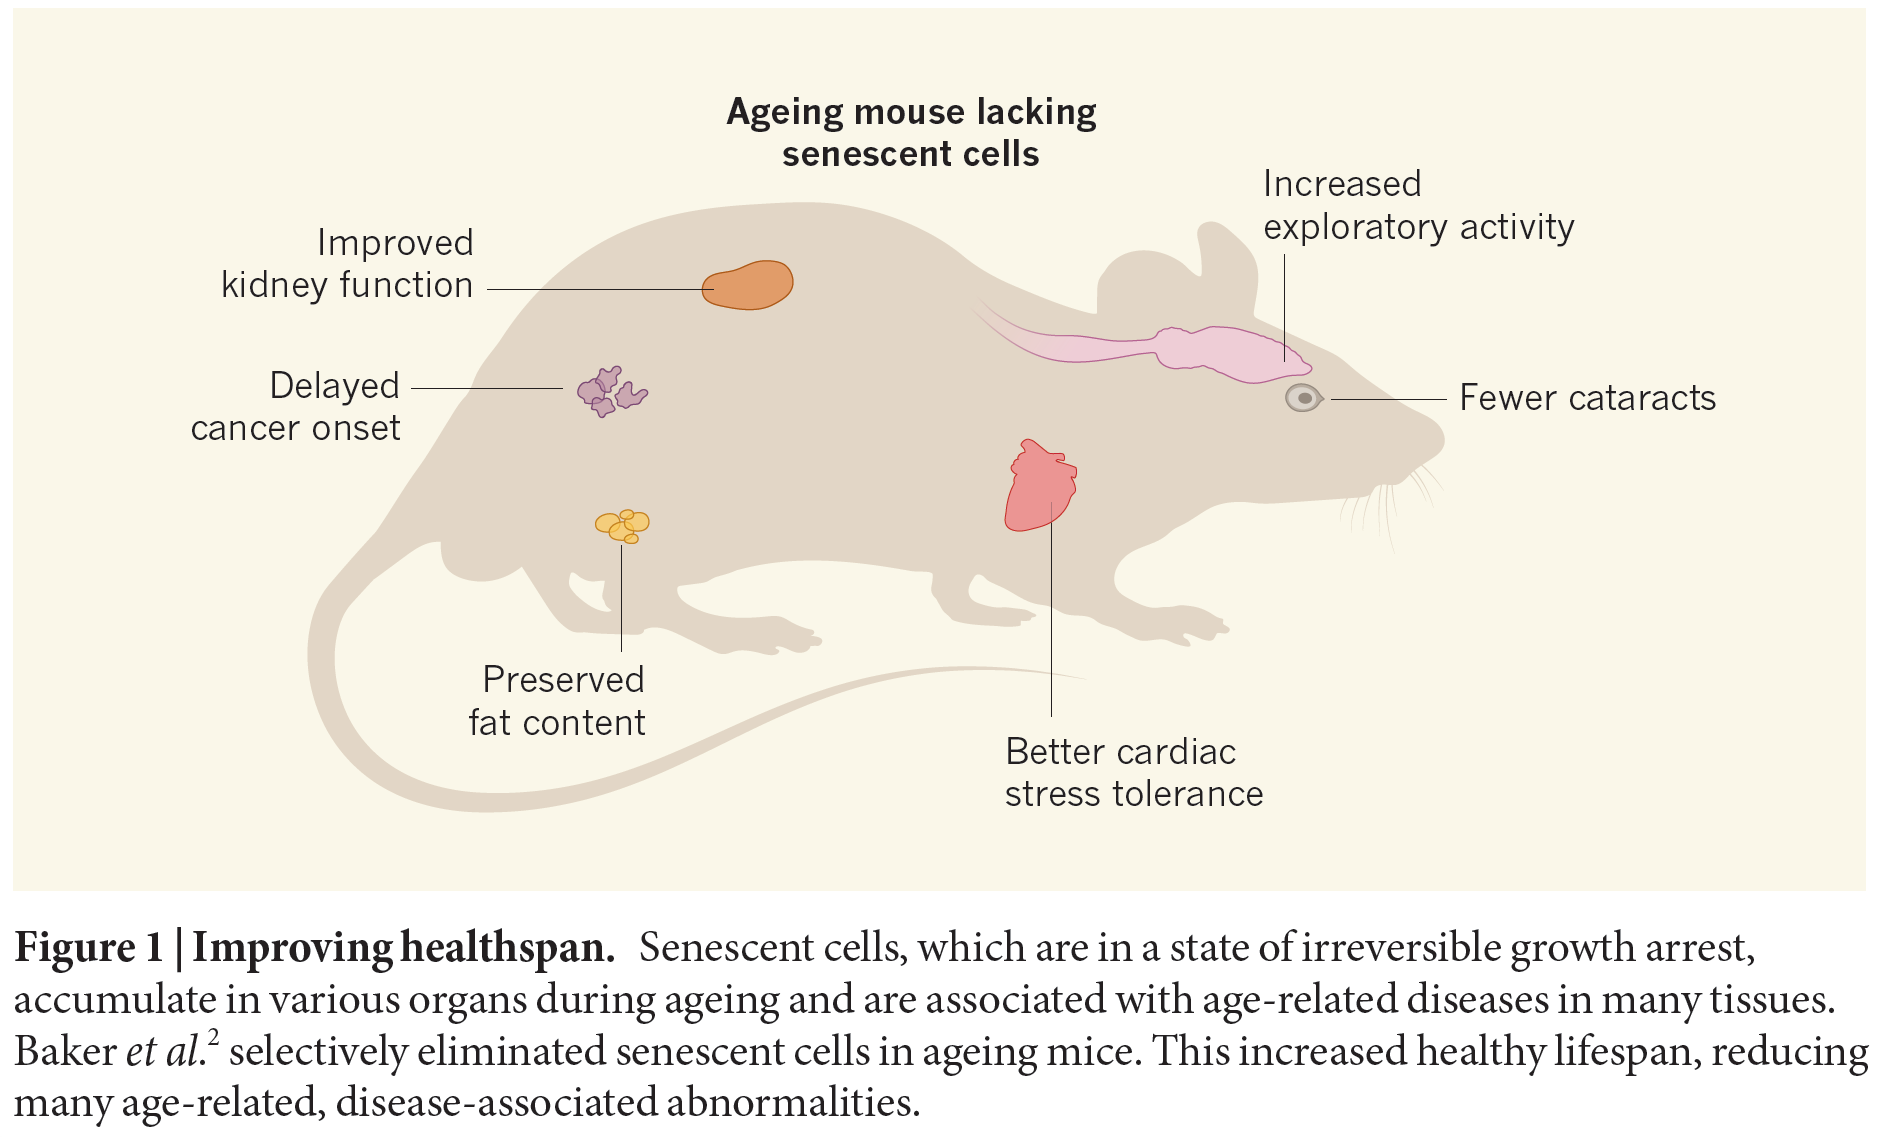 CSC duo in Nature “News and Views” on ageing